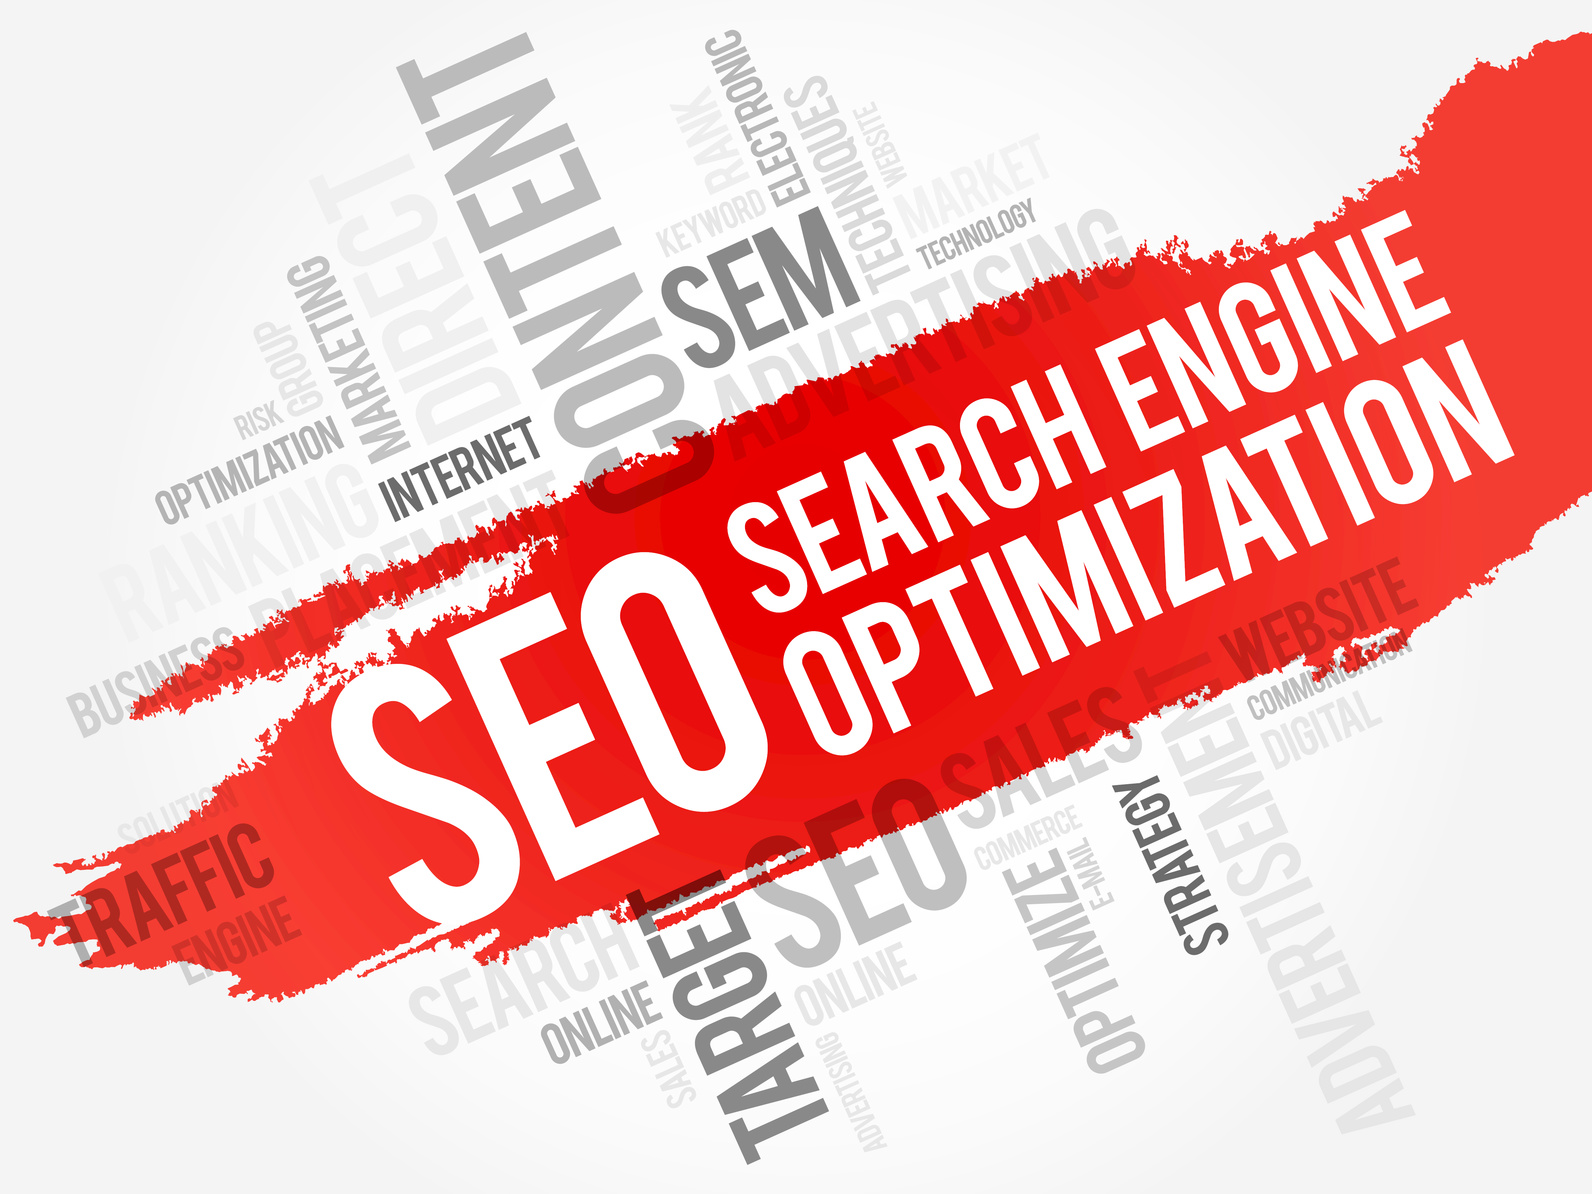 These SEO Strategies Could Leave You Hurting